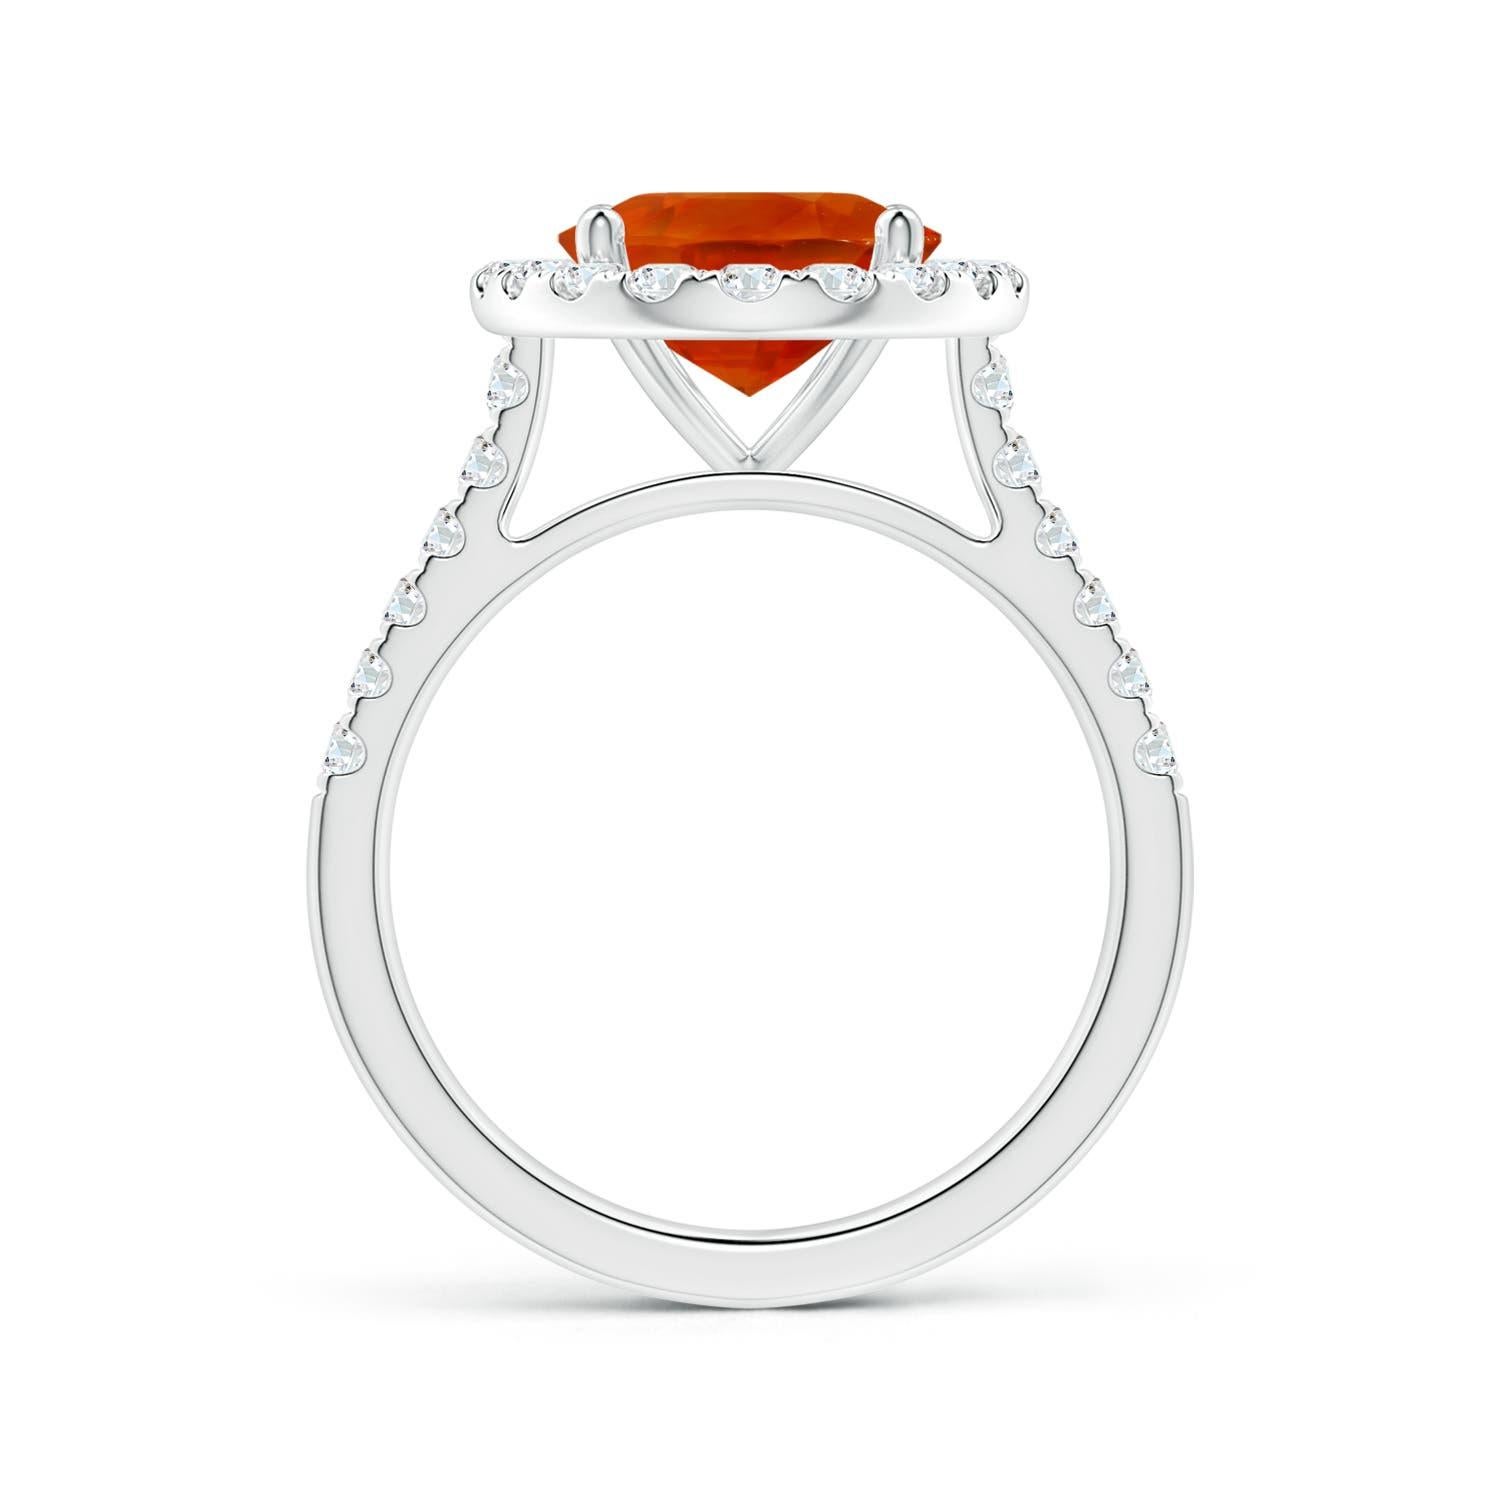 For Sale:  Angara Gia Certified Natural Orange Sapphire Diamond Halo Ring in White Gold 2